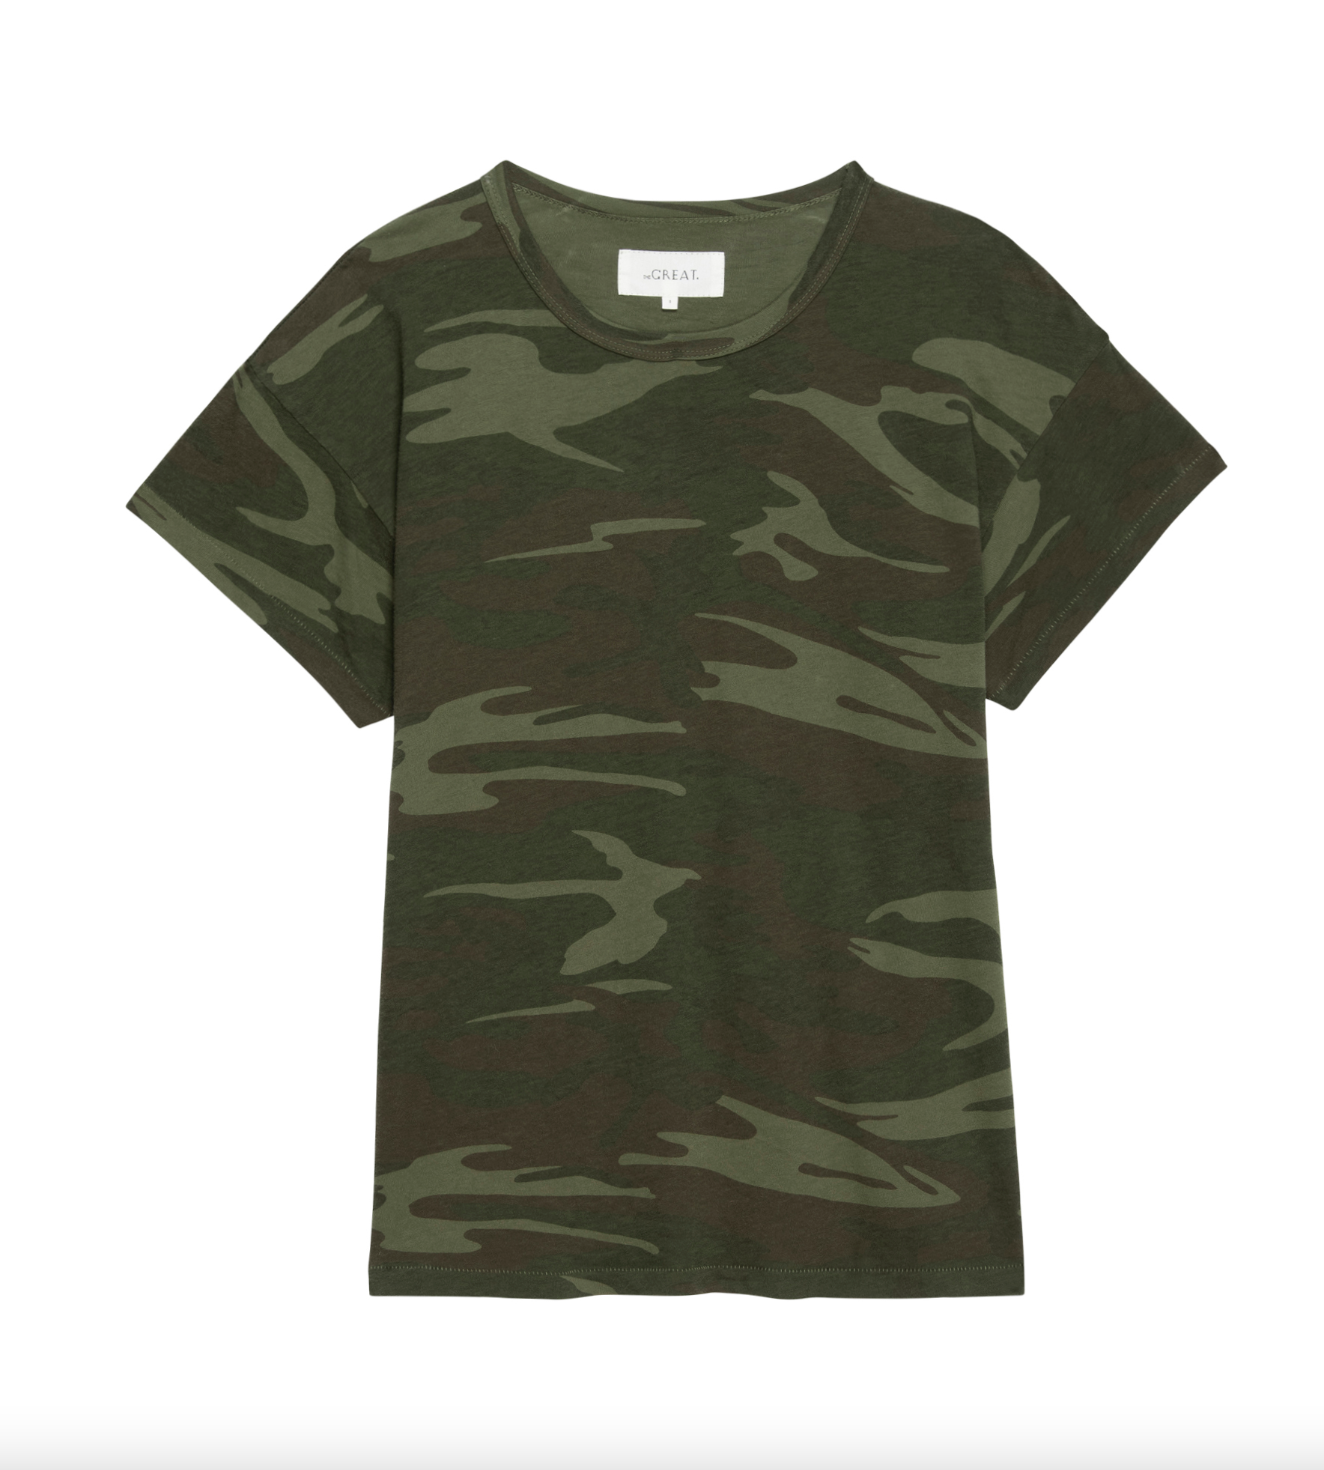 A THE BOXY CREW DEEP WOODS CAMO t-shirt with green and dark green patterns displayed on a plain white background. The t-shirt has a round neckline and short sleeves, offering a distinct Arizona style from The Great Inc.